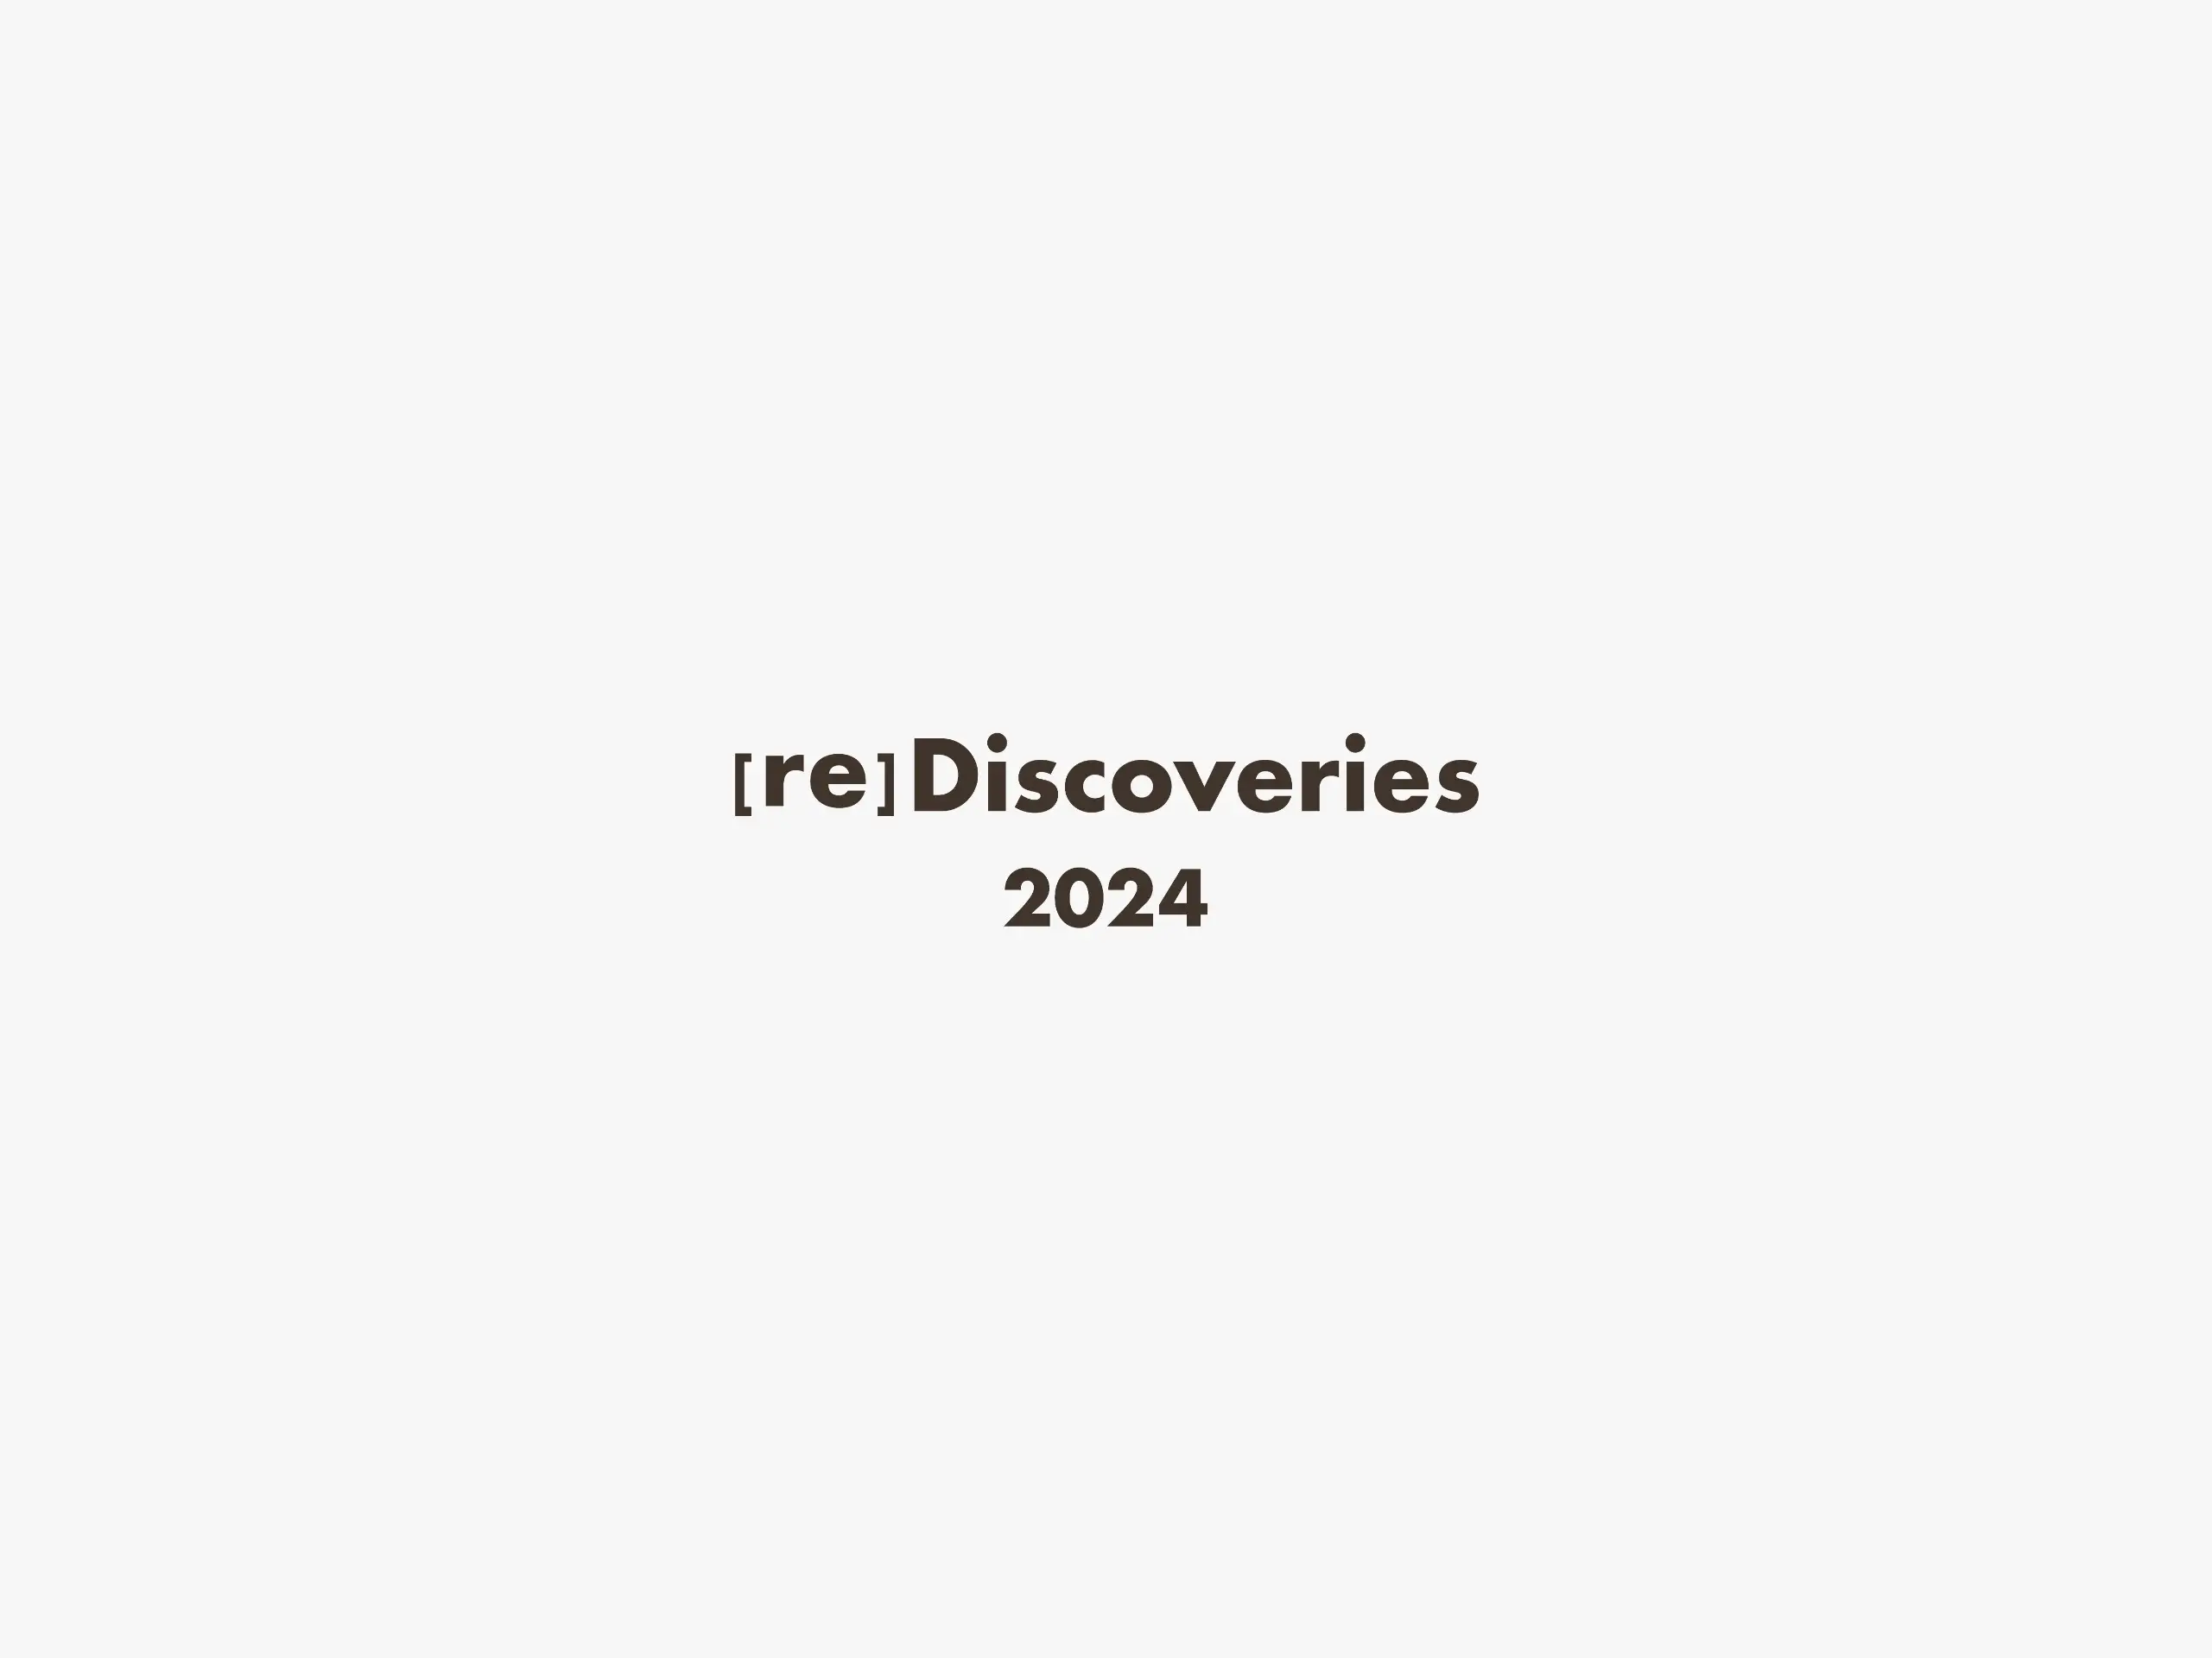 [re]Discoveries 2024